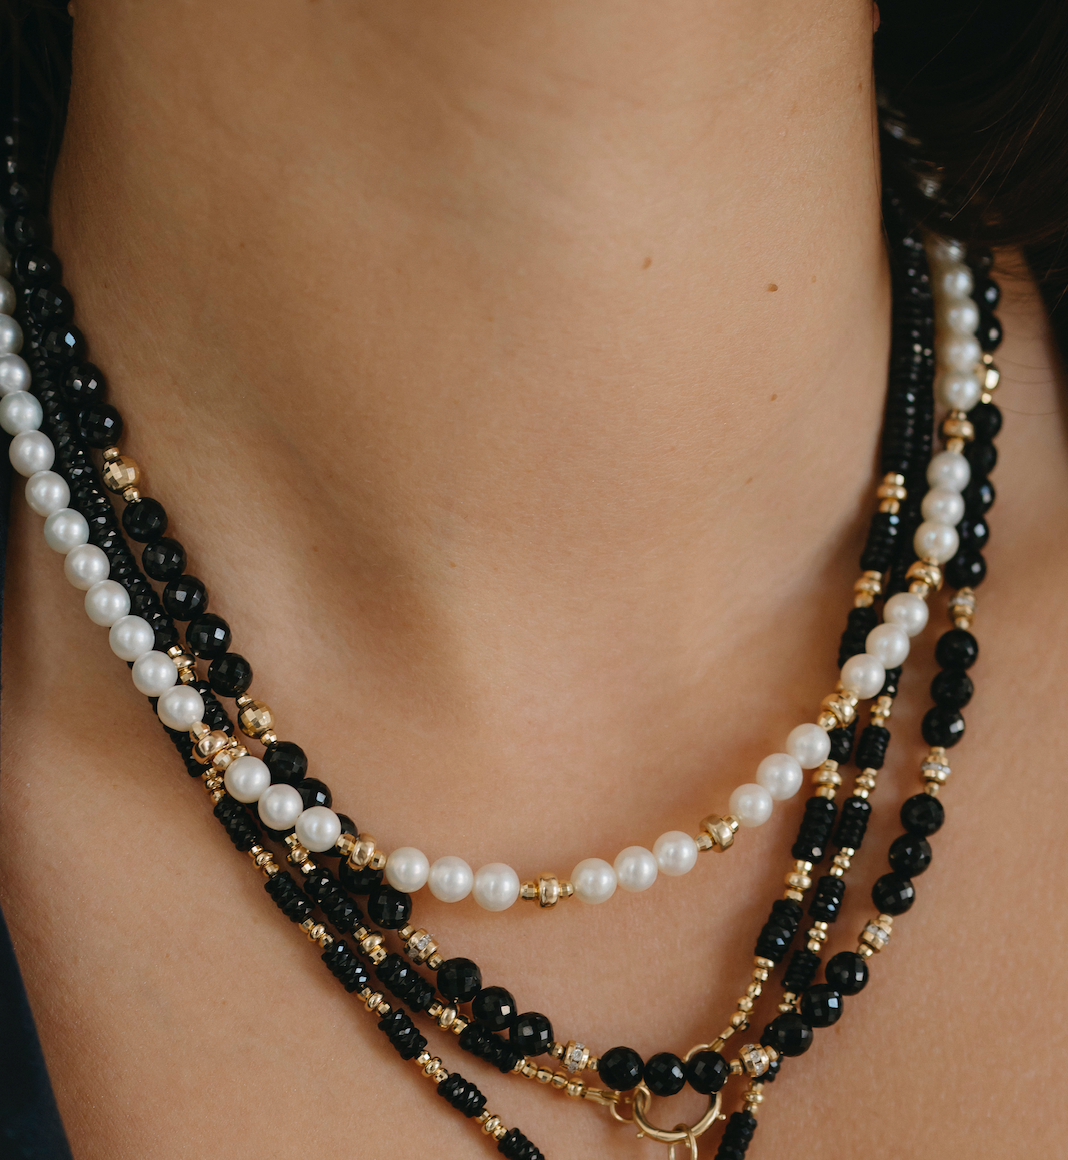 BLACK SPINEL FACETED BEADED NECKLACE WITH 14K GOLD AND DIAMOND BEADS